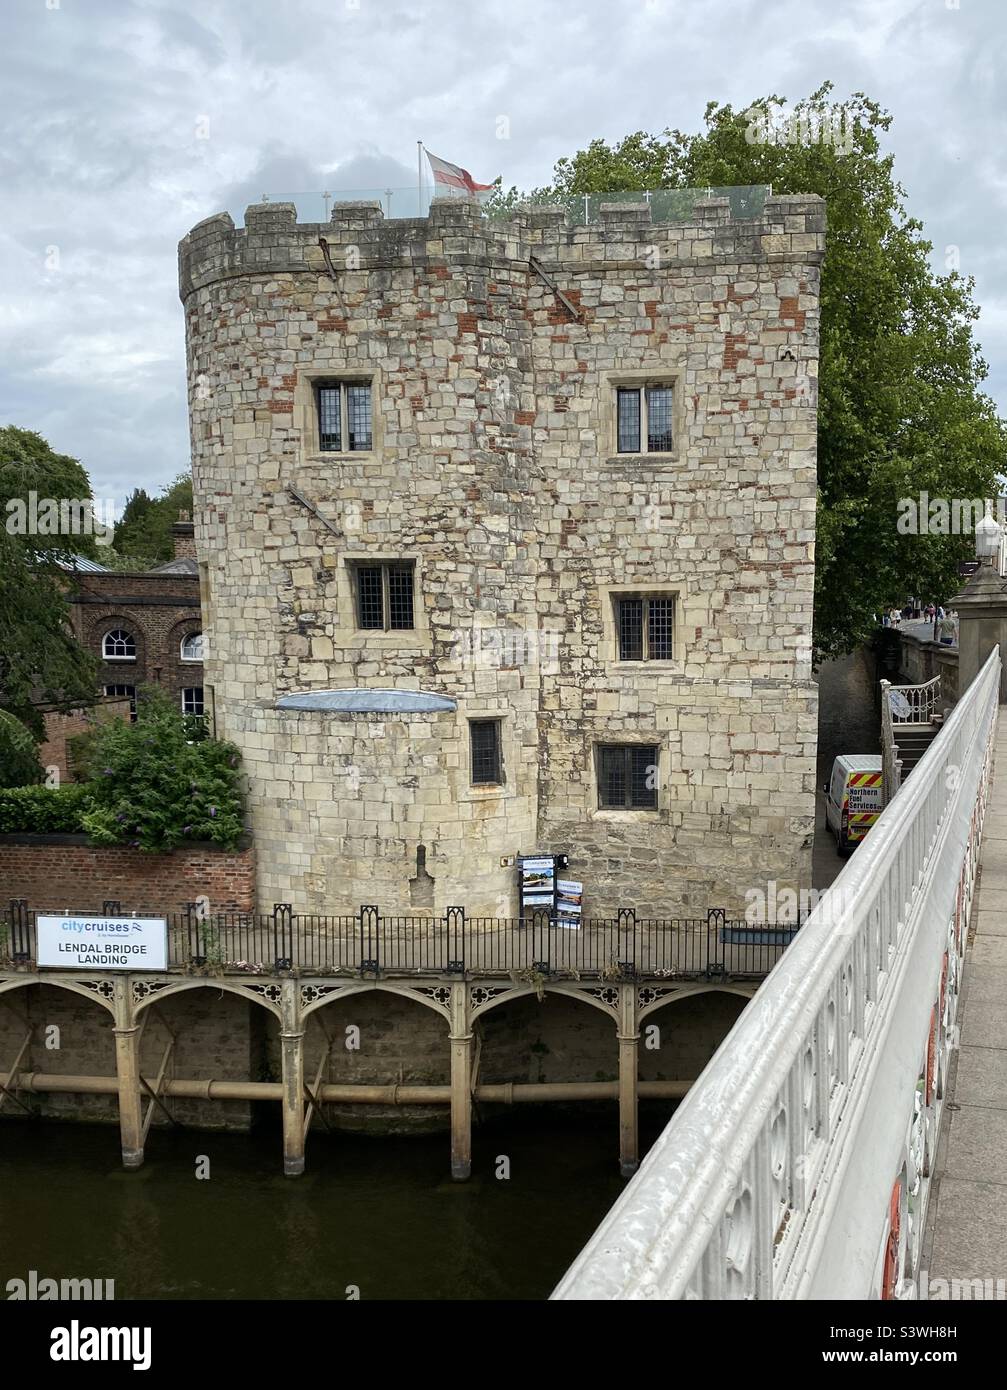 Lendal Tower, a medieval (1300), Grade I listed building on the bank of the River Ouse in York, UK. Built to control river toll payments, and later for water supply and offices. Now it is for rent. Stock Photo